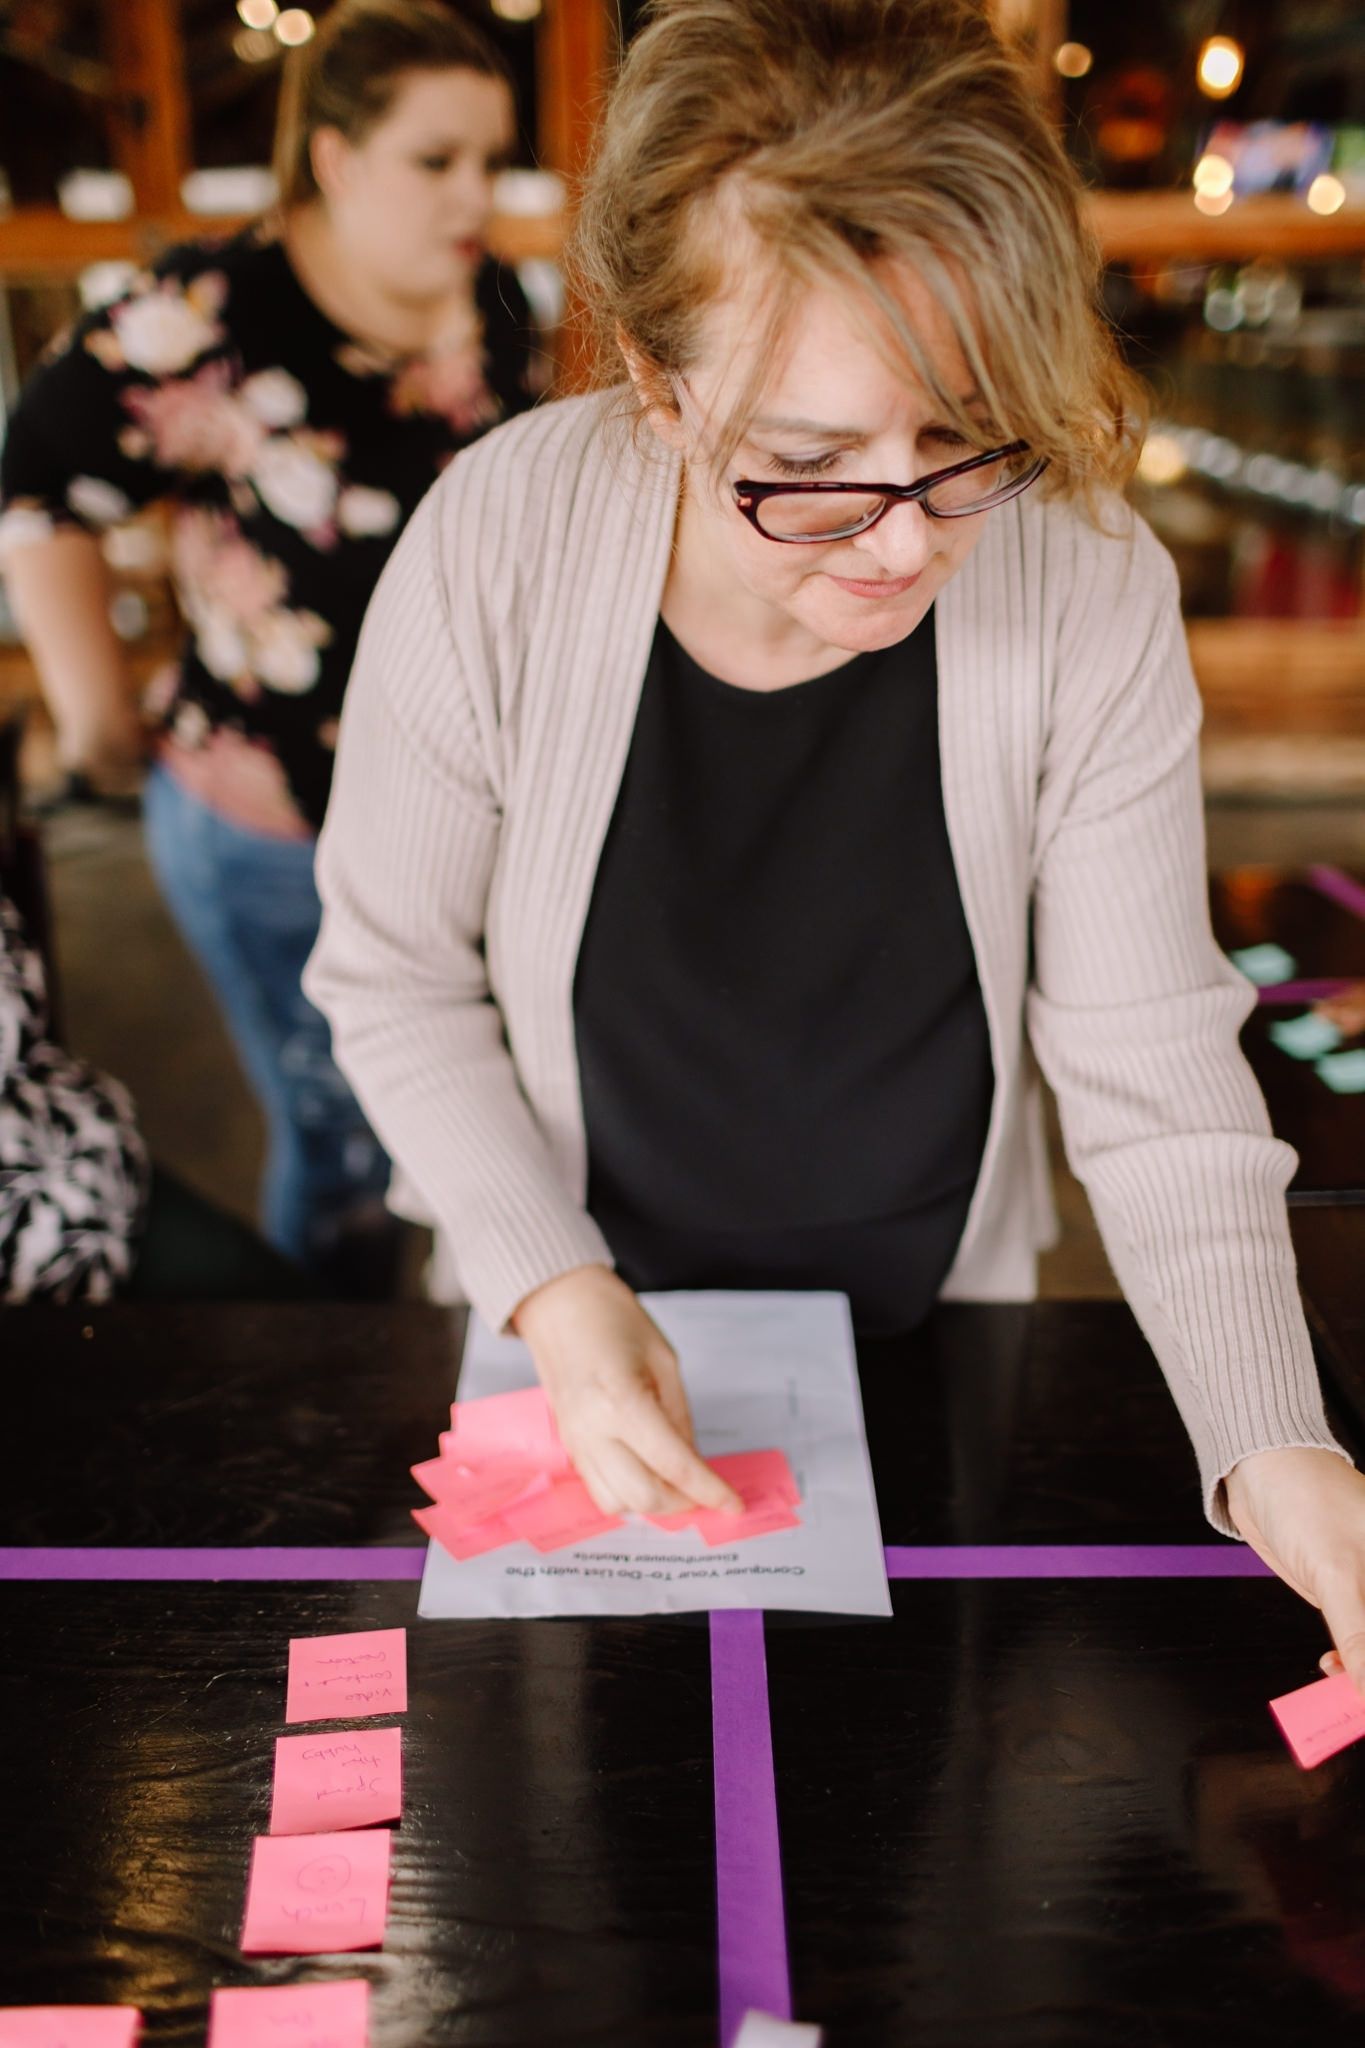 Woman at a workshop event sticks post it notes to a grid on a table